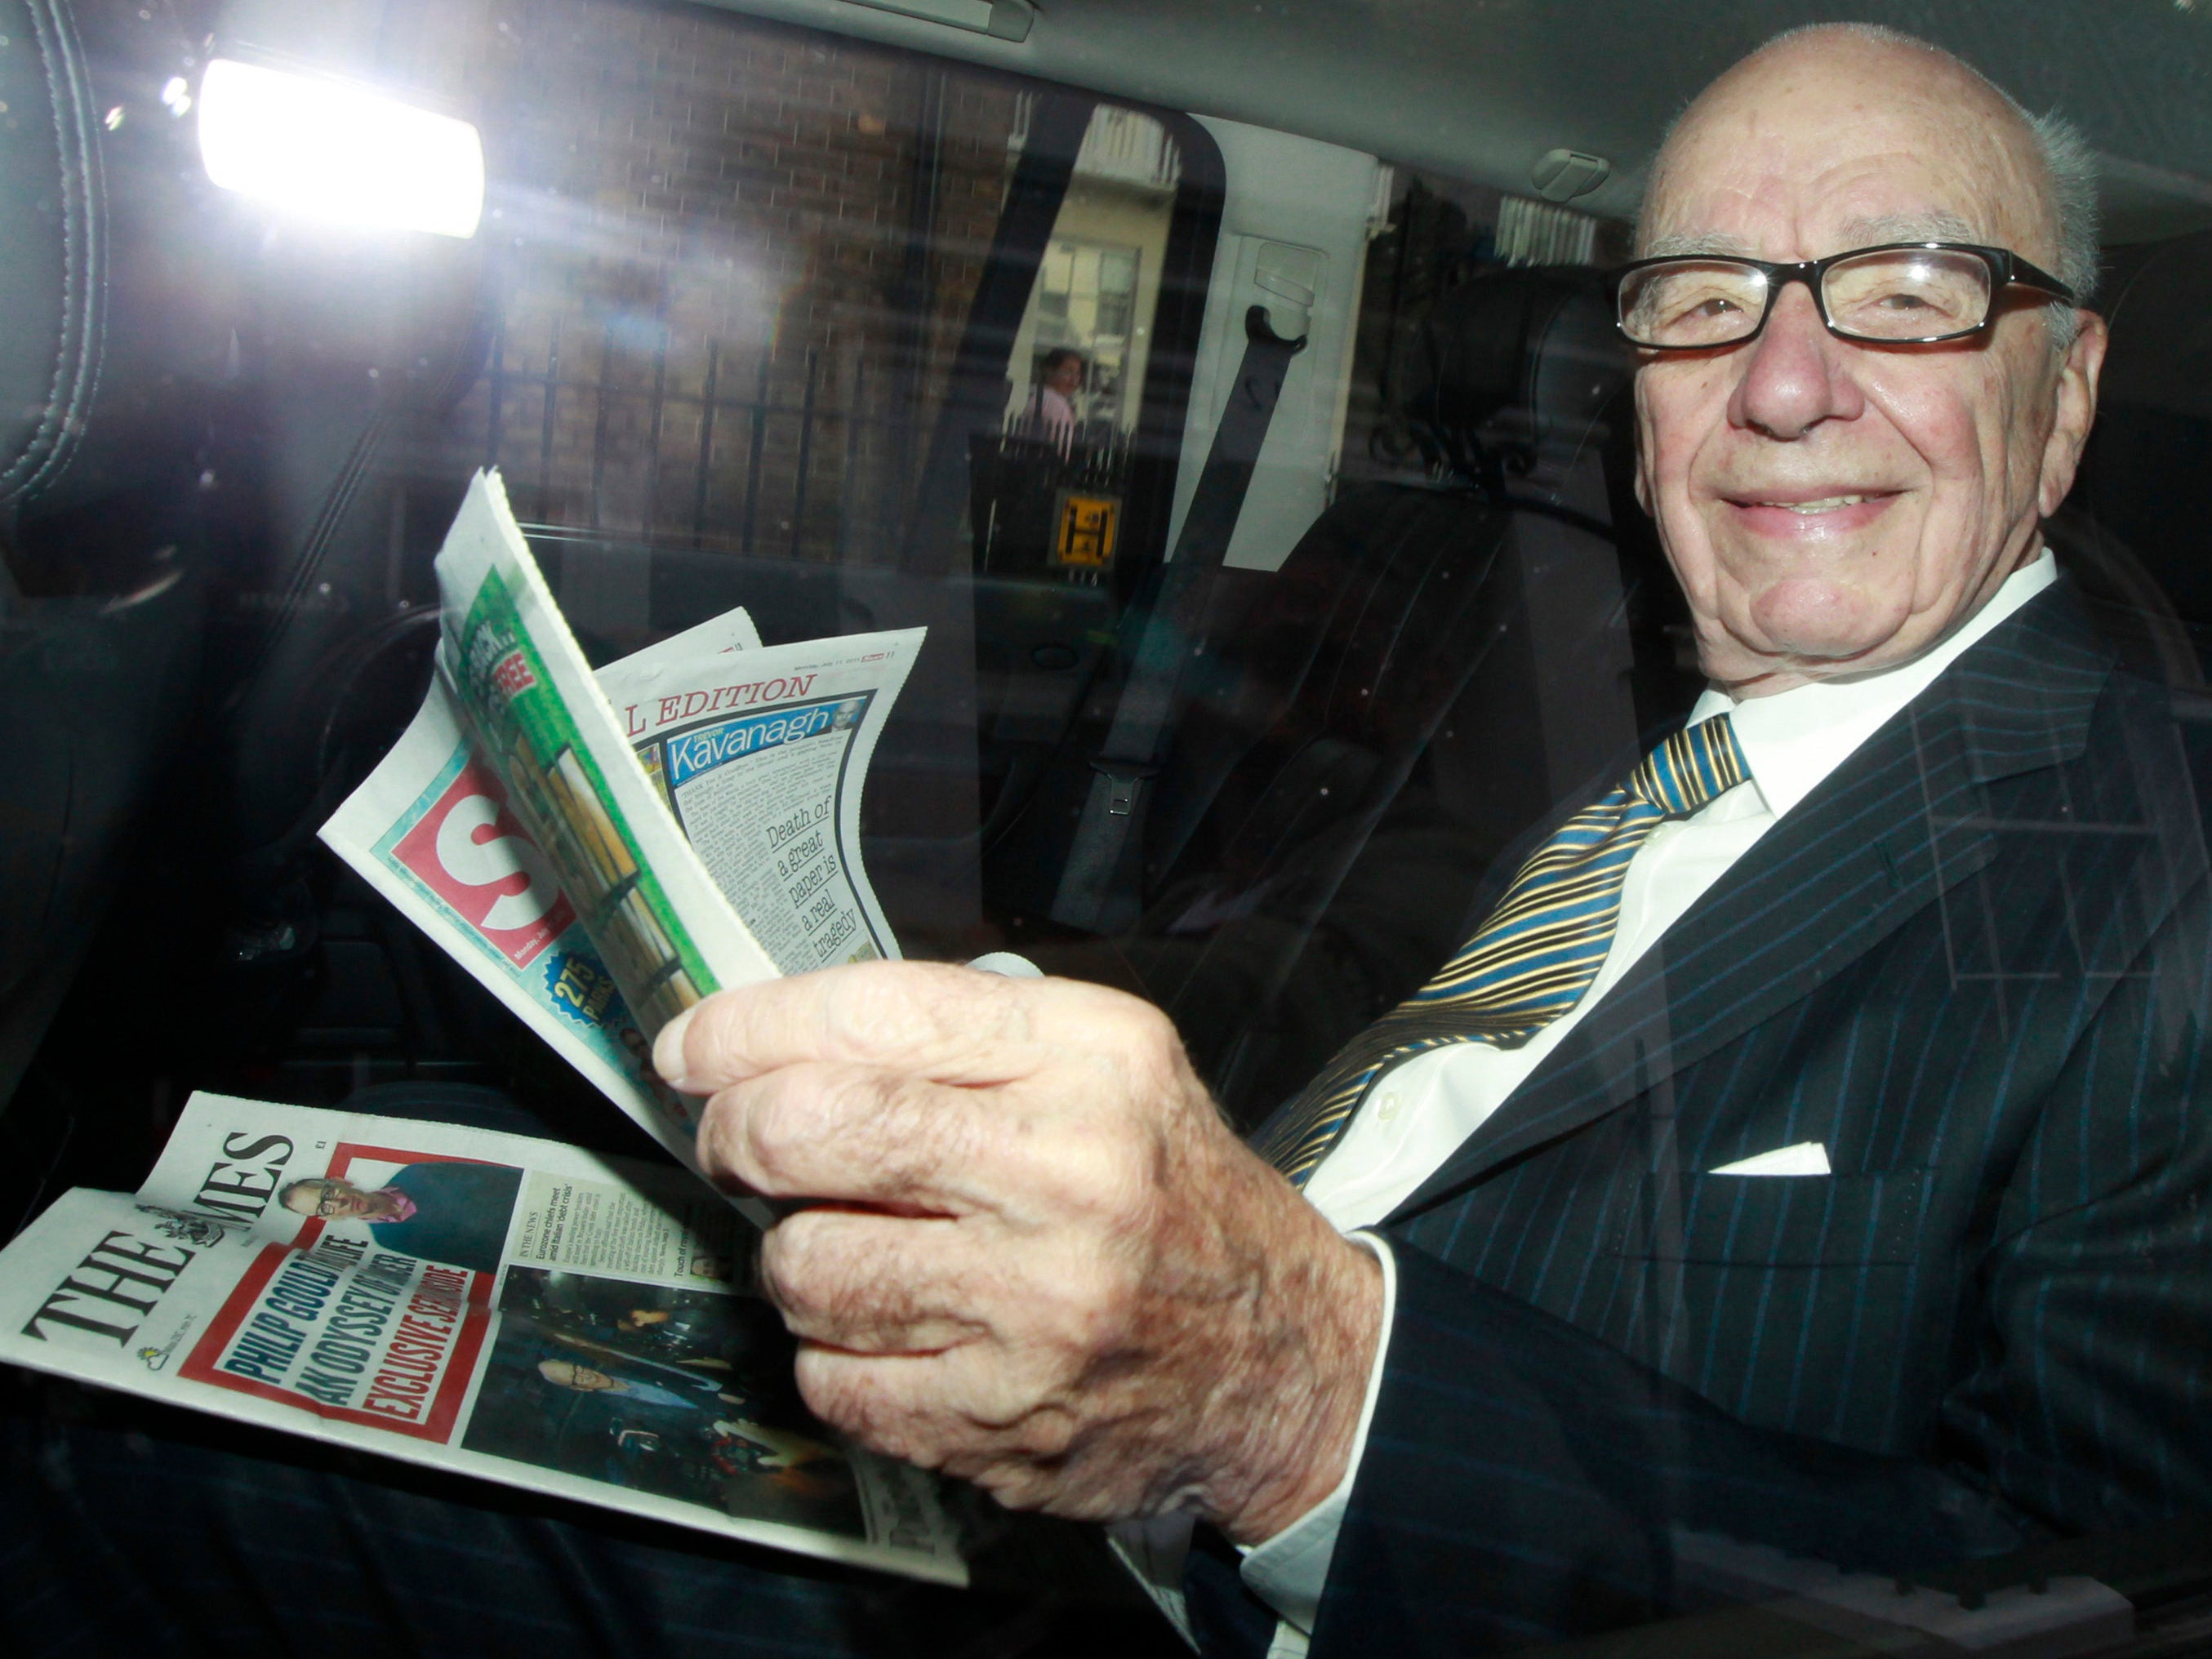 Podcast 57: What is the Murdoch Factor?